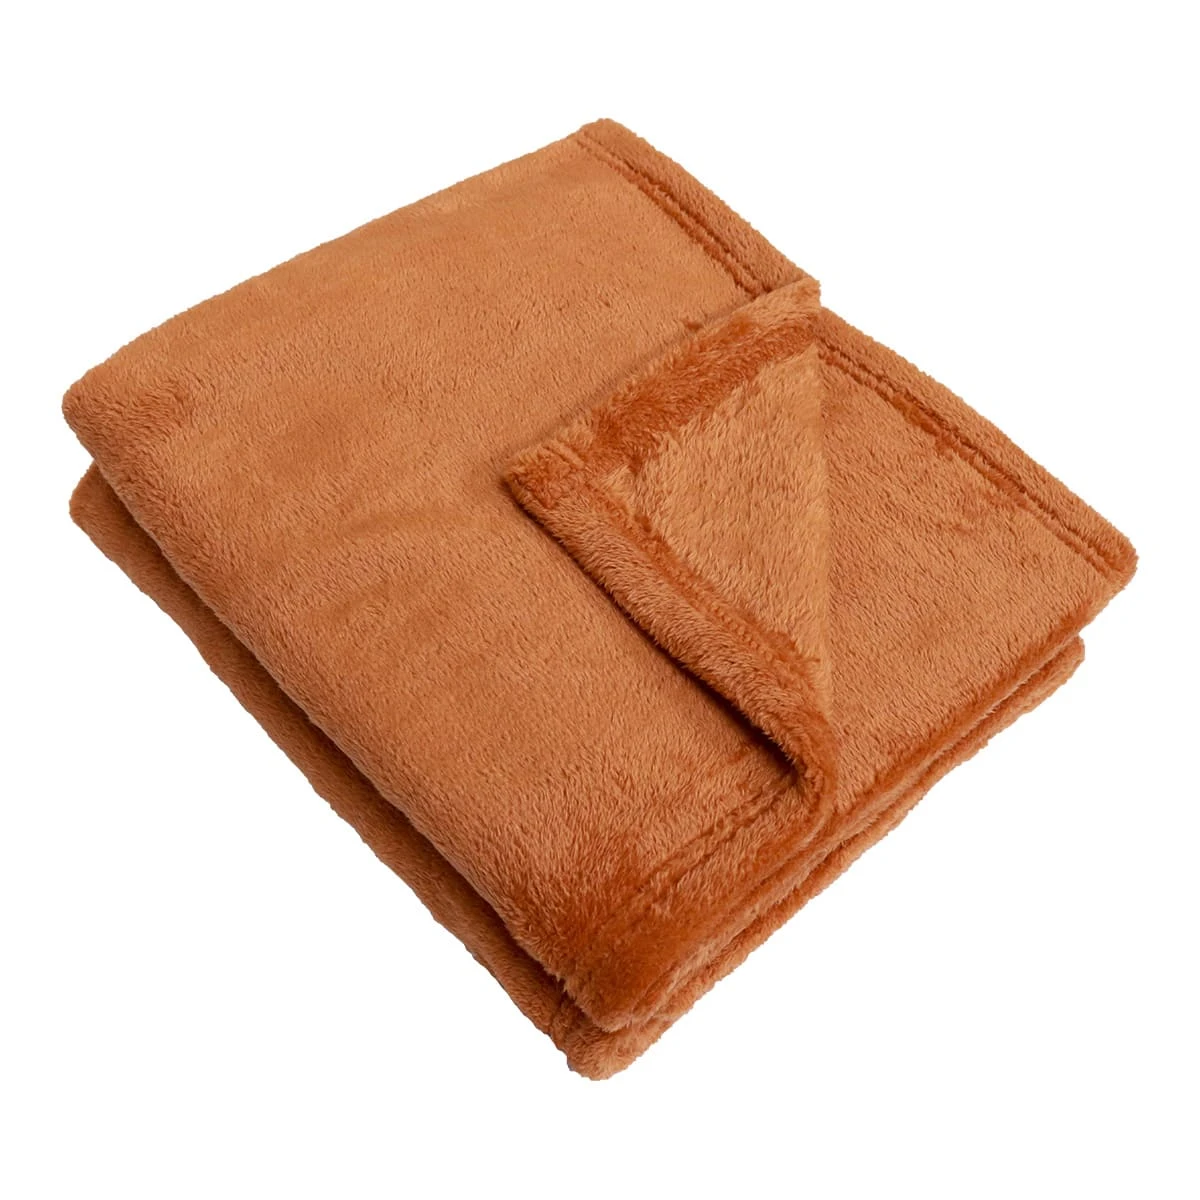 Muddy Embroidery Plush Pillow Blanket (Brown)